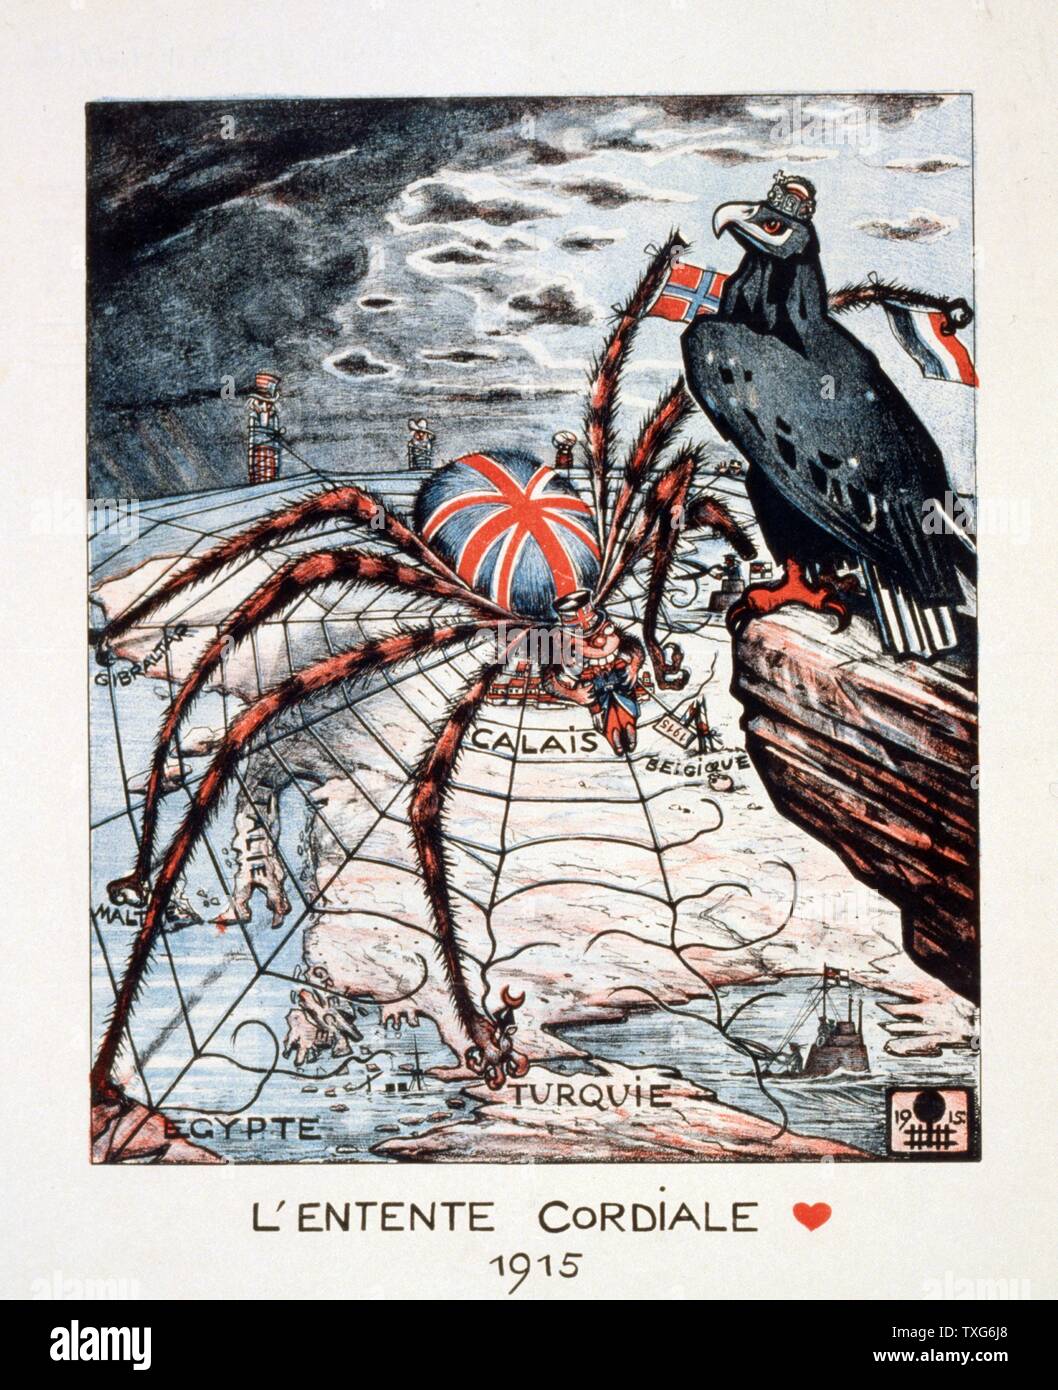 Entente Cordiale, 1904 agreement between France and Britain partly to prevent German expansion. German  (Eagle) view of Entente in 1915,  as spider Britain with everything in her web which is gradually being broken. Stock Photo